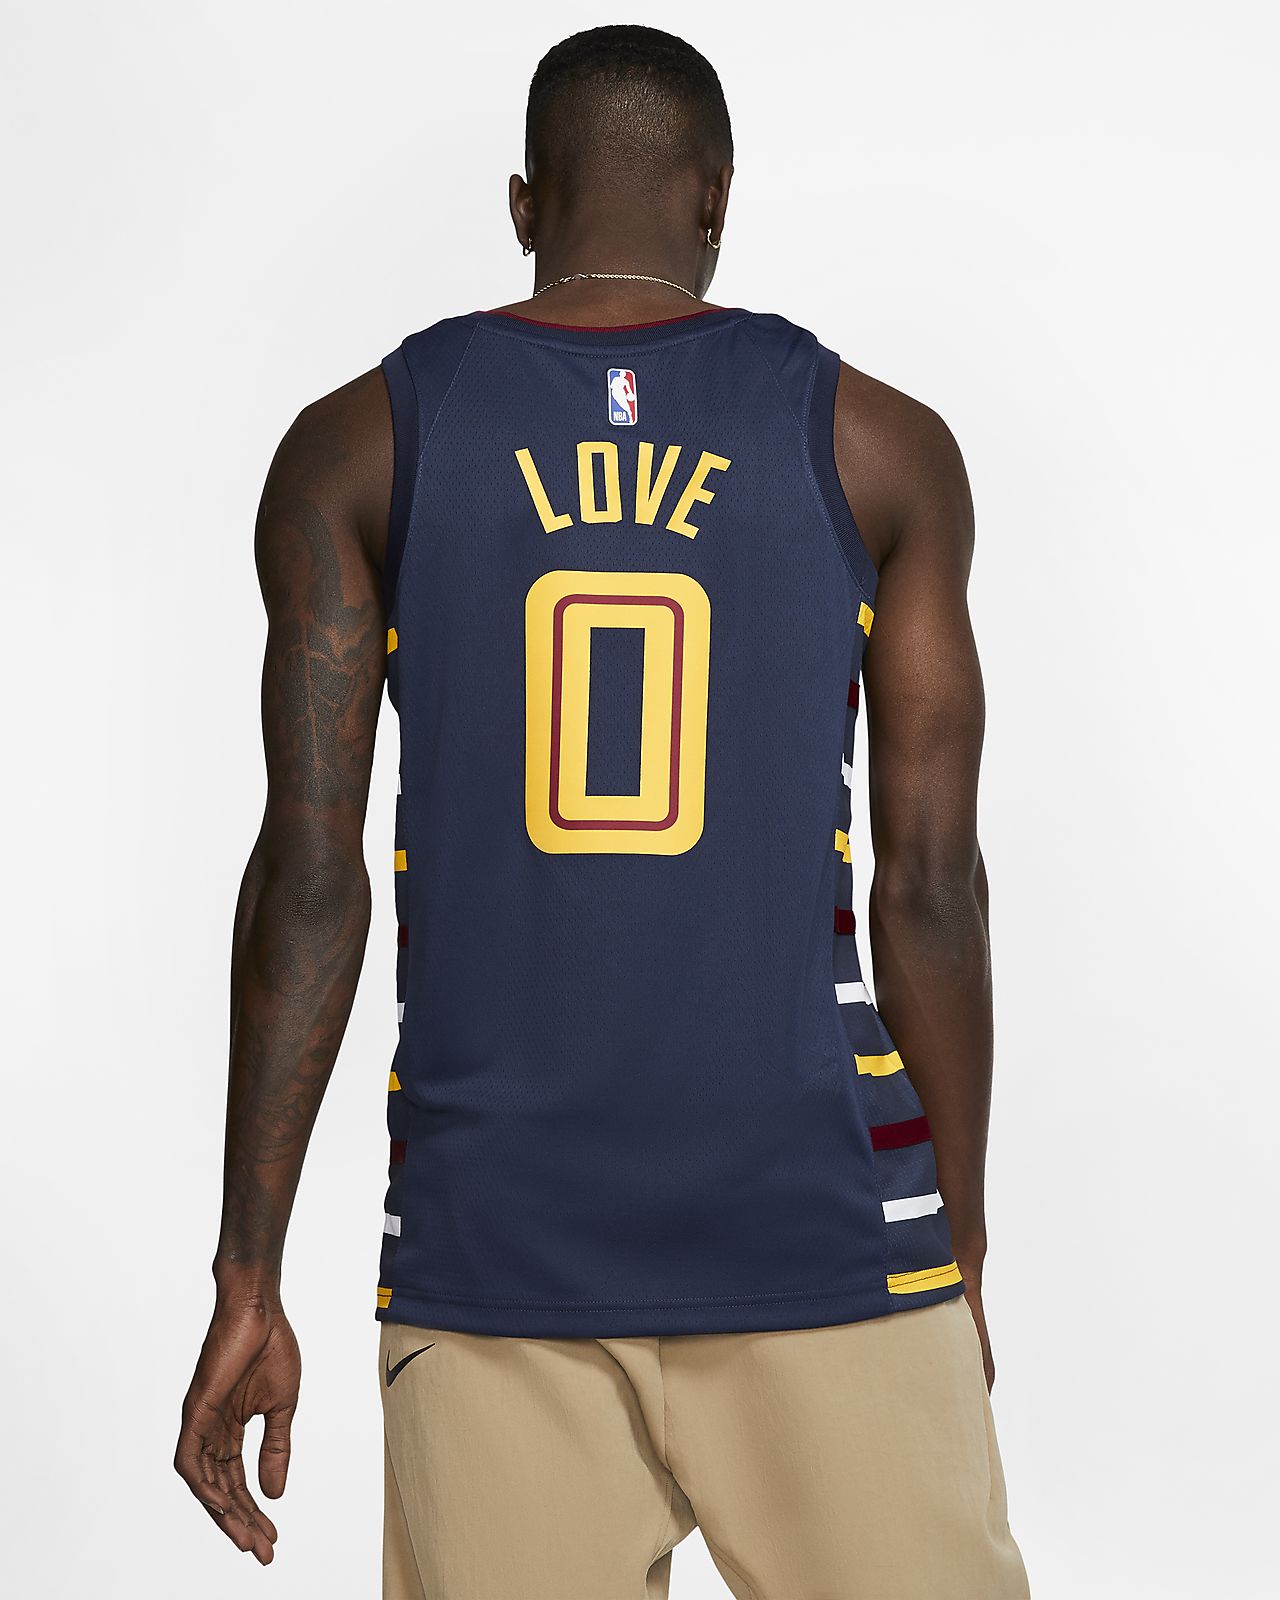 jersey kevin love